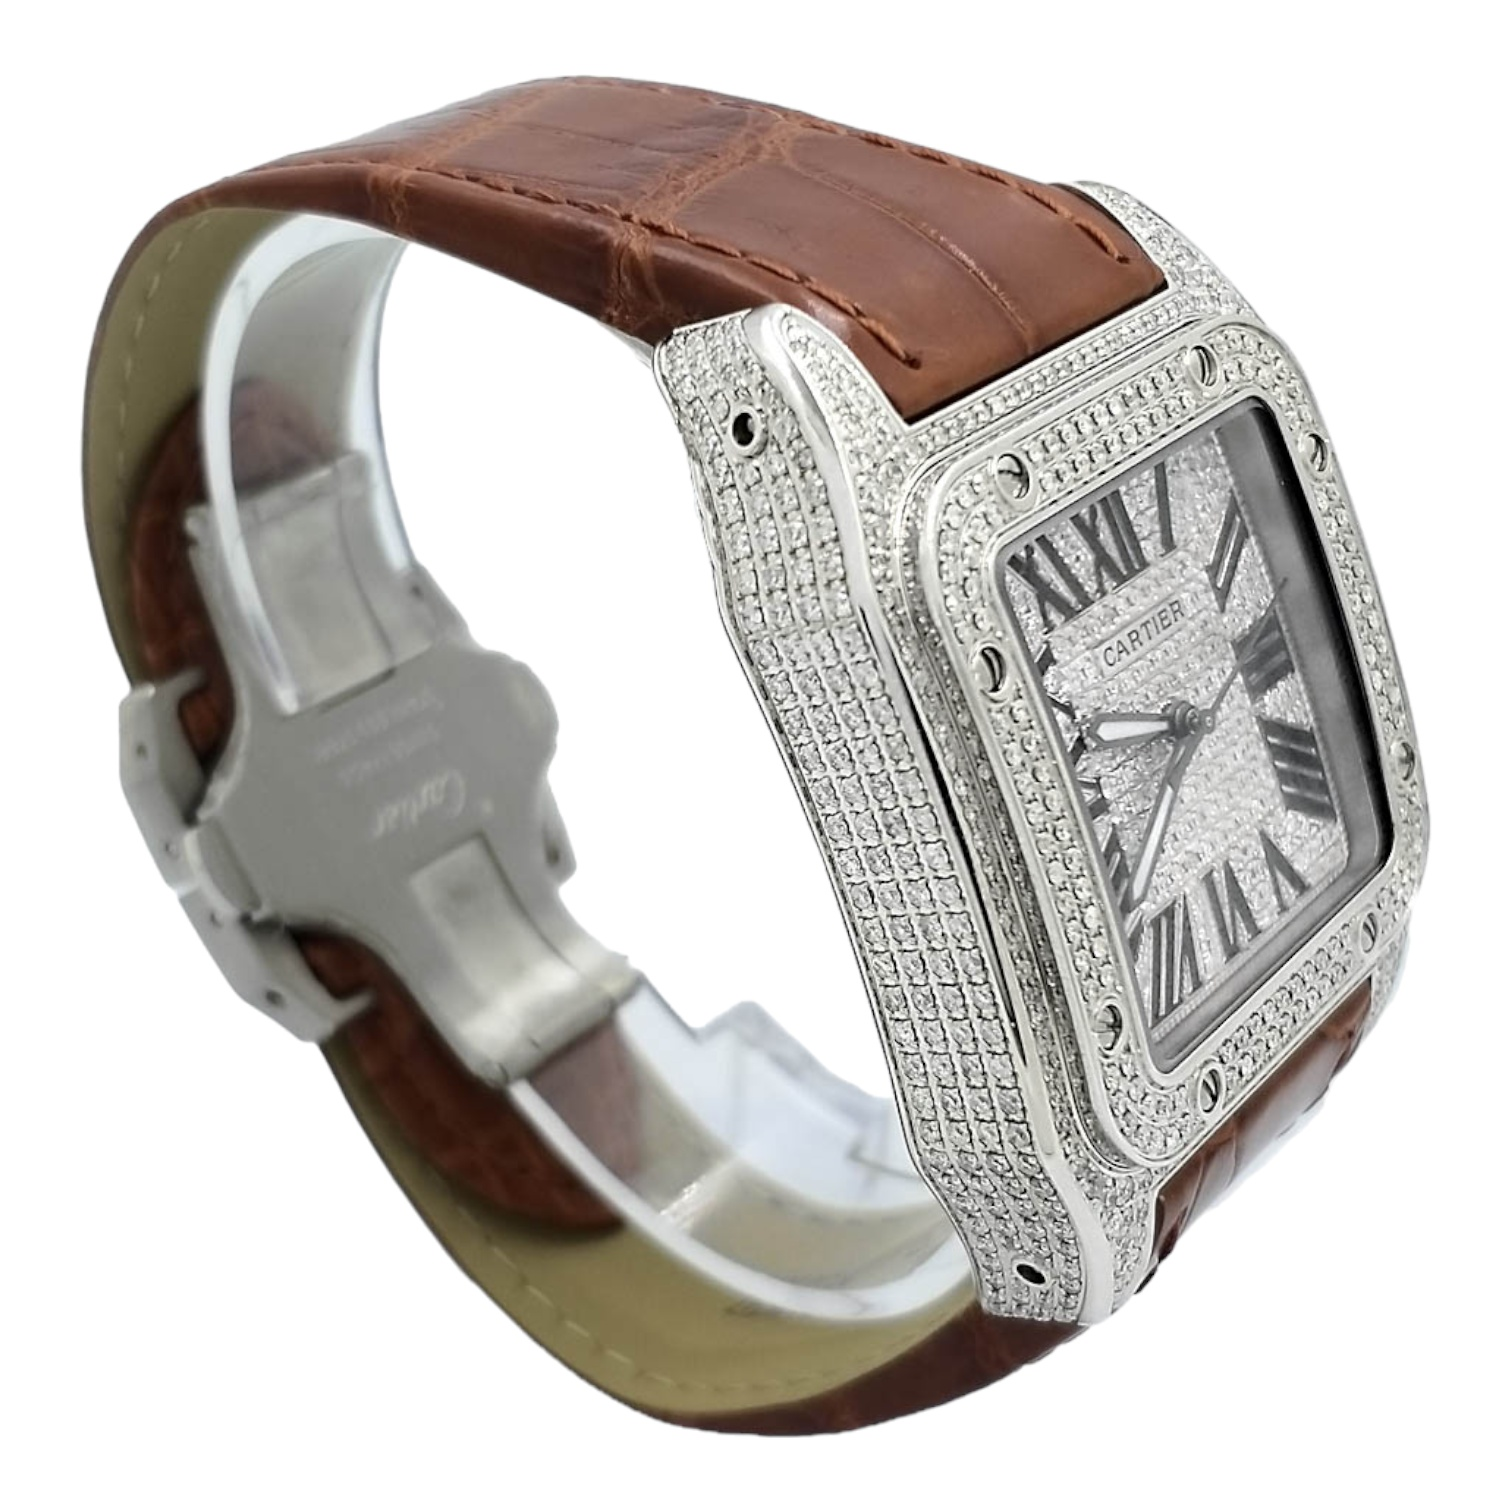 Cartier Santos 100 XL Iced Out Diamonds setting Ref. 2656 - LuxuryInStock